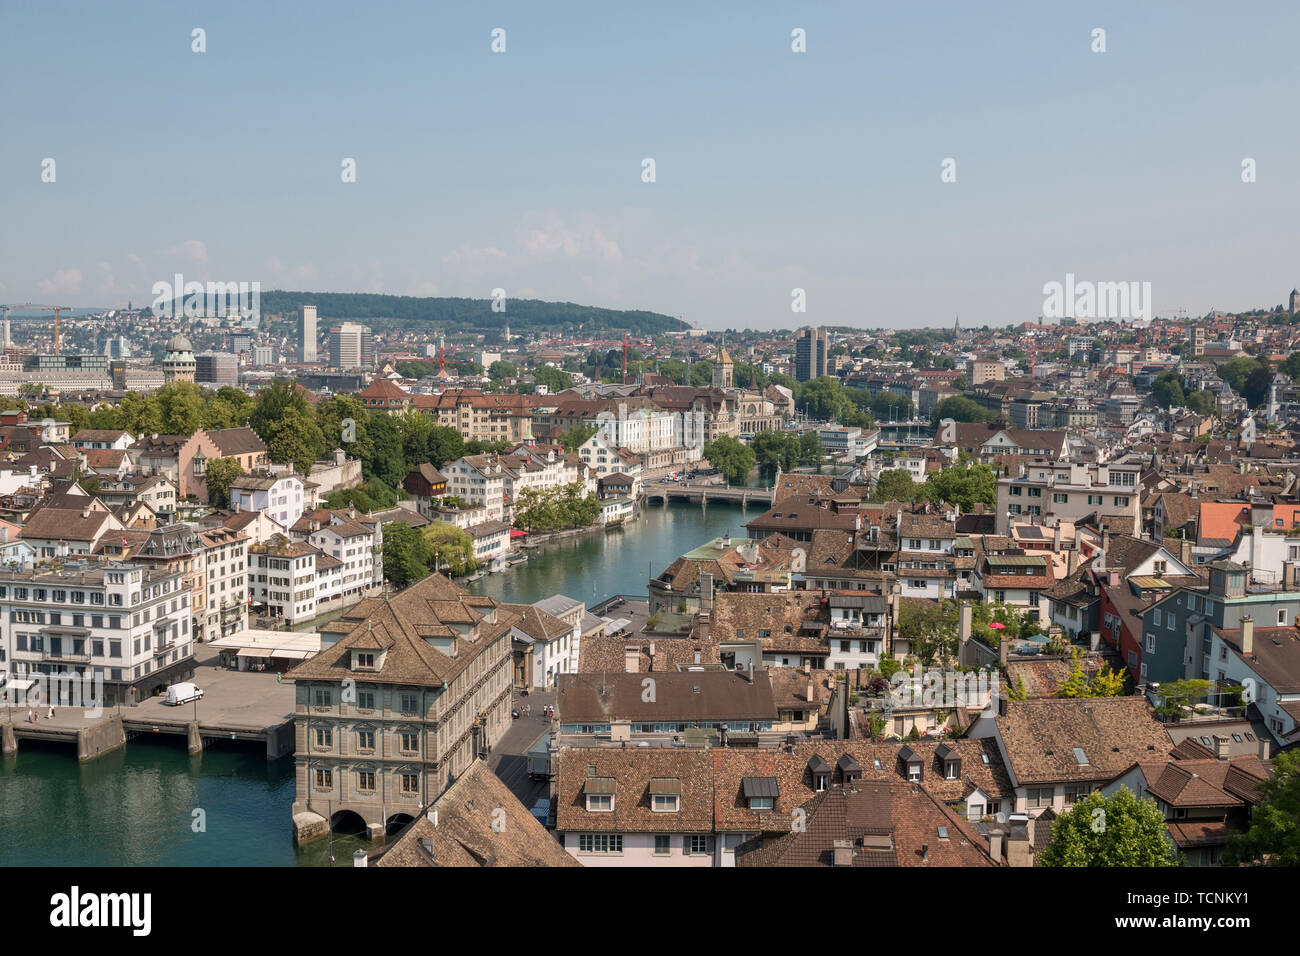 Aerial view of historic Zurich city center with river Limmat from Grossmunster Church, canton of Zurich, Switzerland. Sunny day in summer Stock Photo